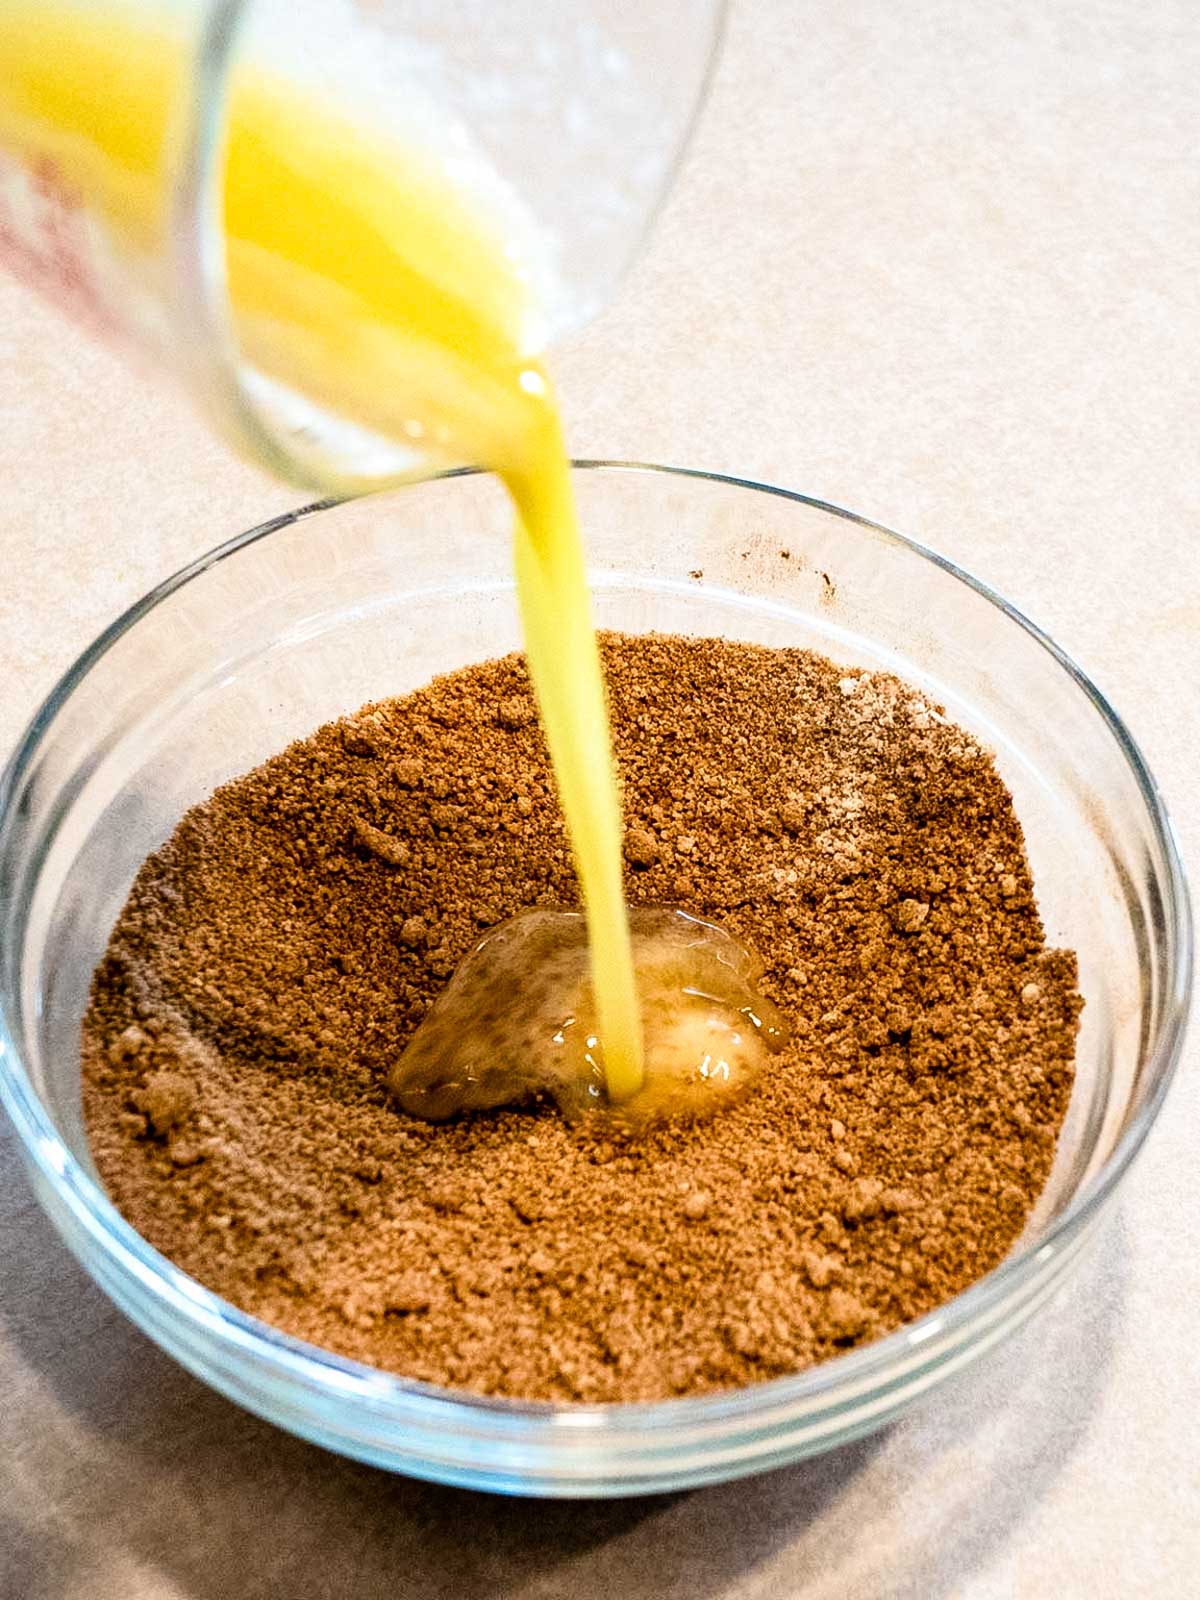 Adding butter to cinnamon mixture.